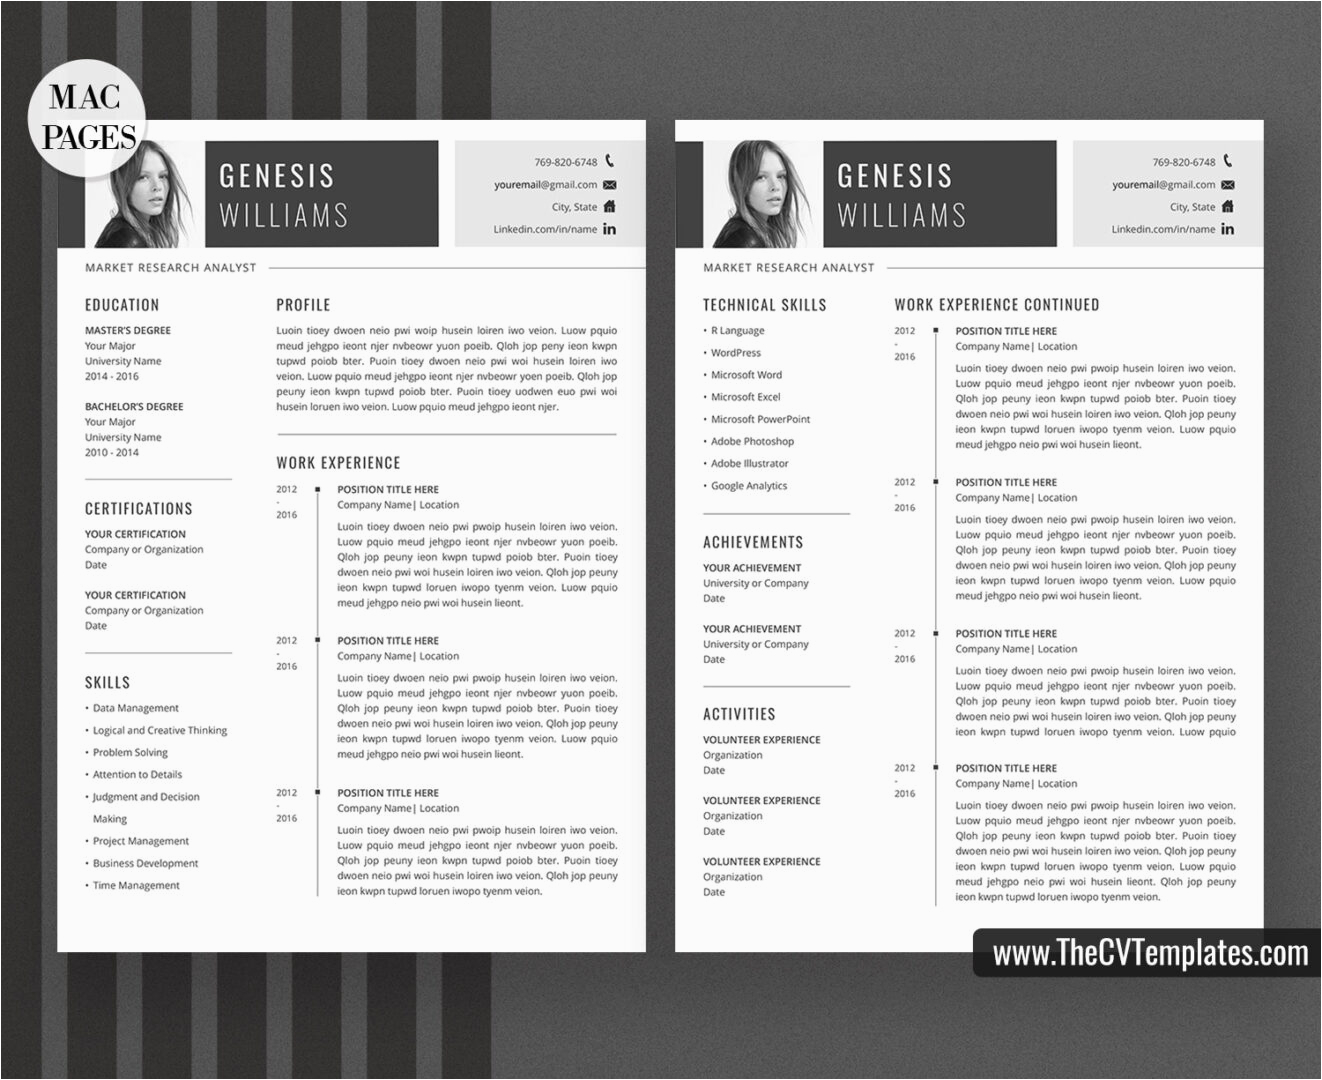 Free Apple Pages Resume Template Download for Mac Pages – Professional Resume Template Curriculum